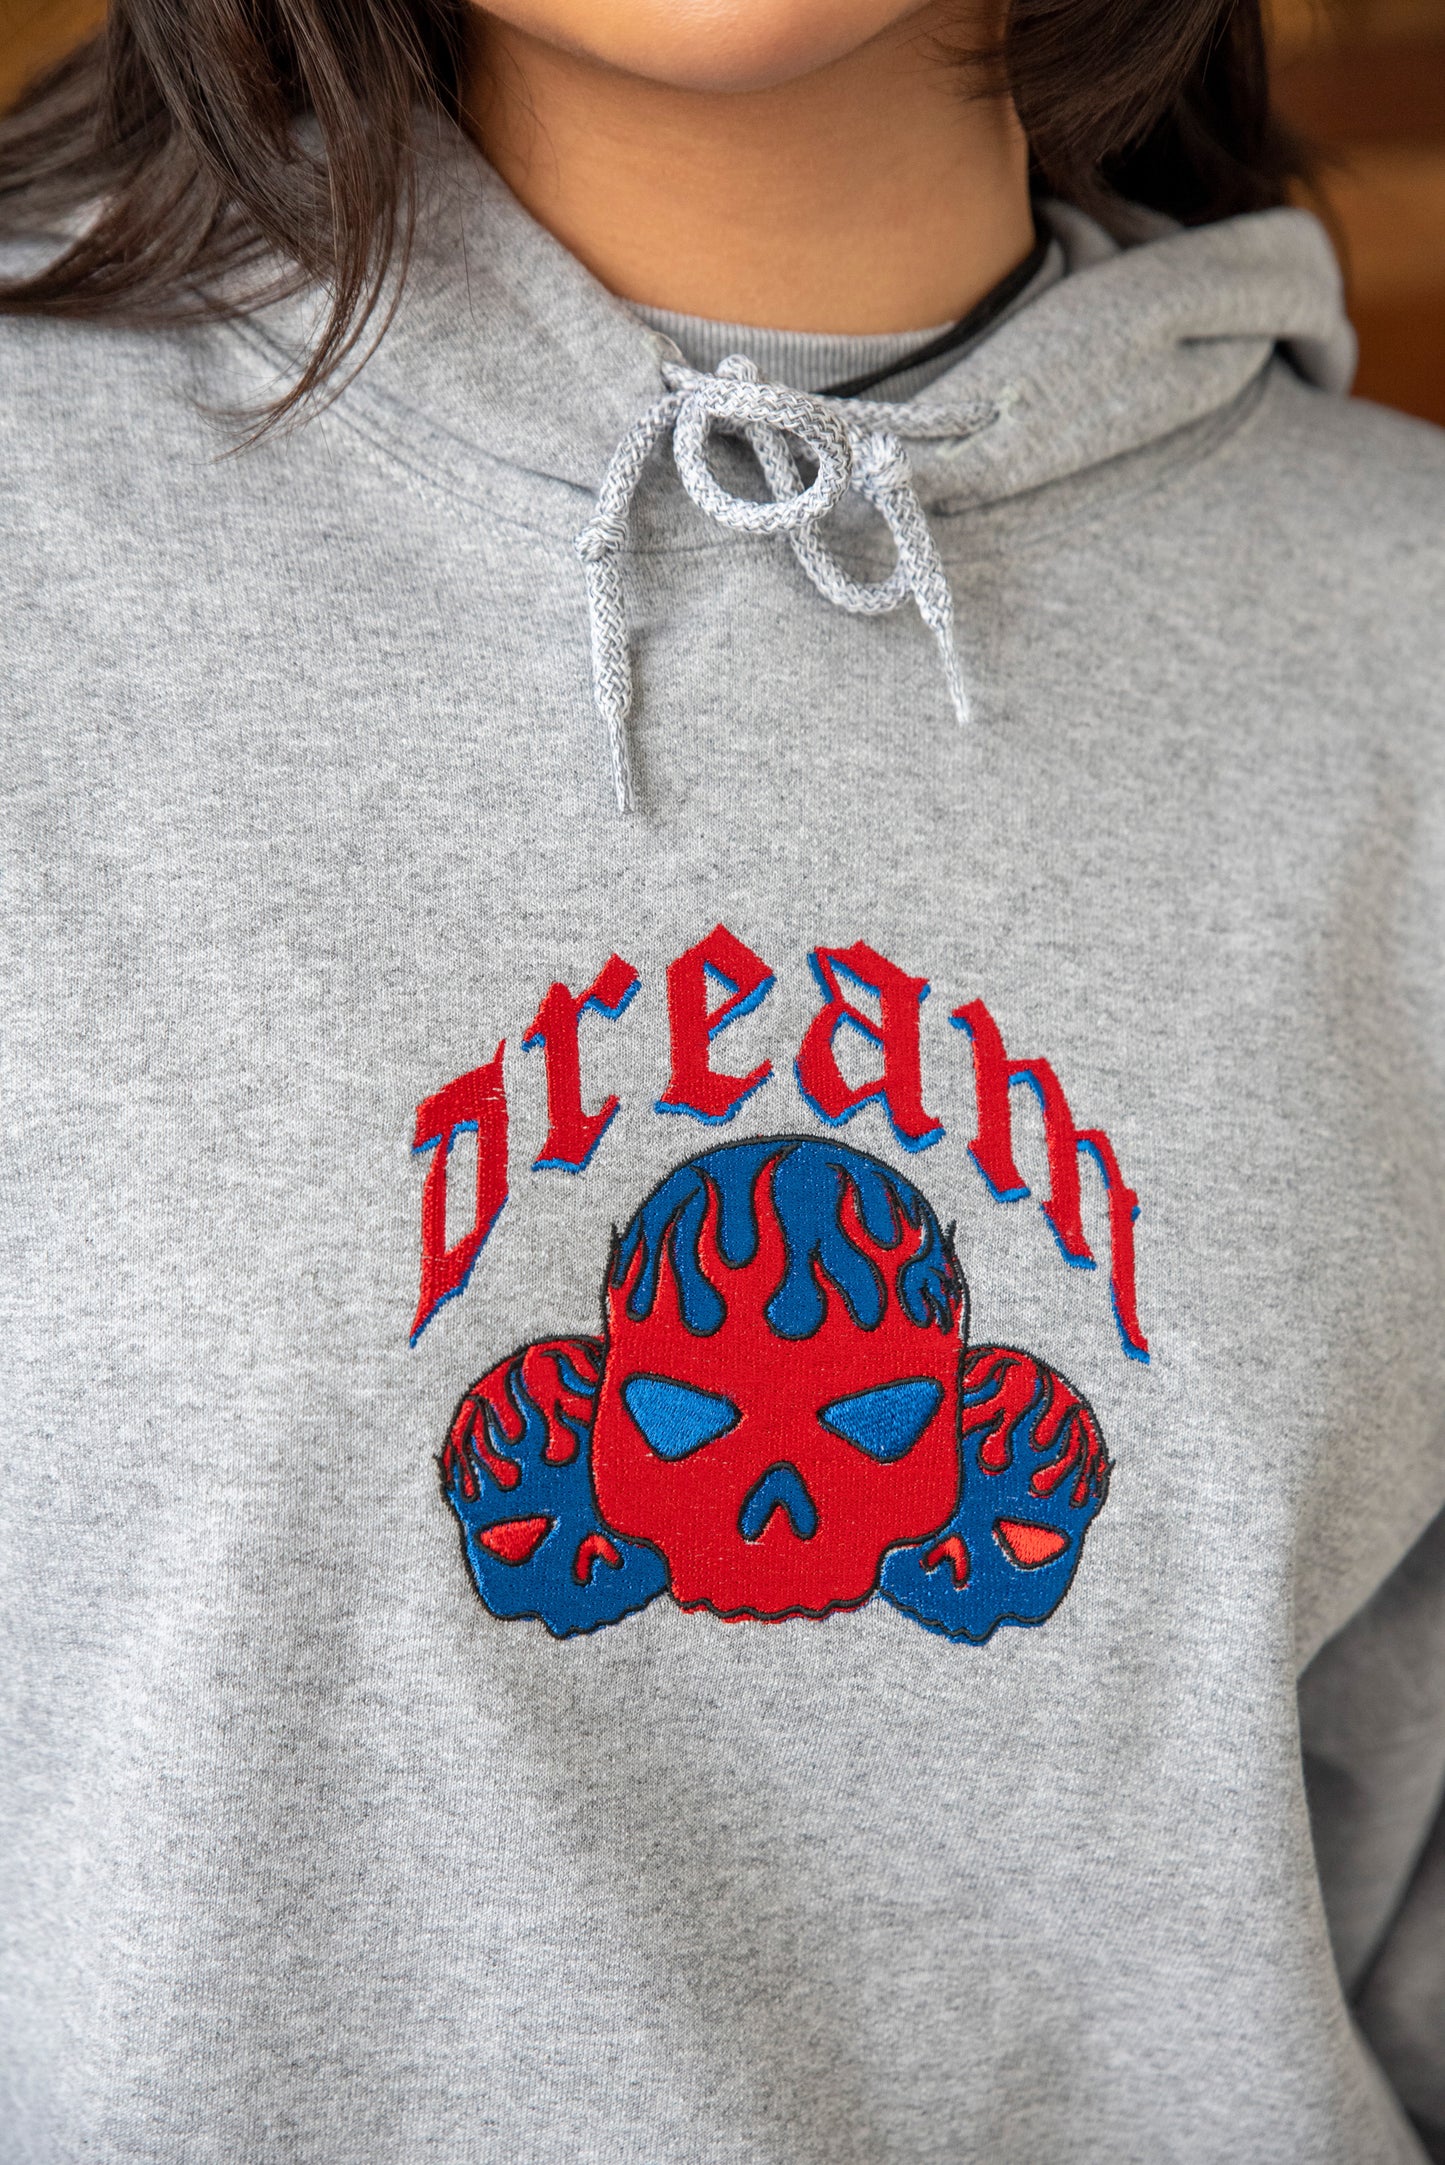 Hoodie in Heather Grey With Flaming Skull Embroidery